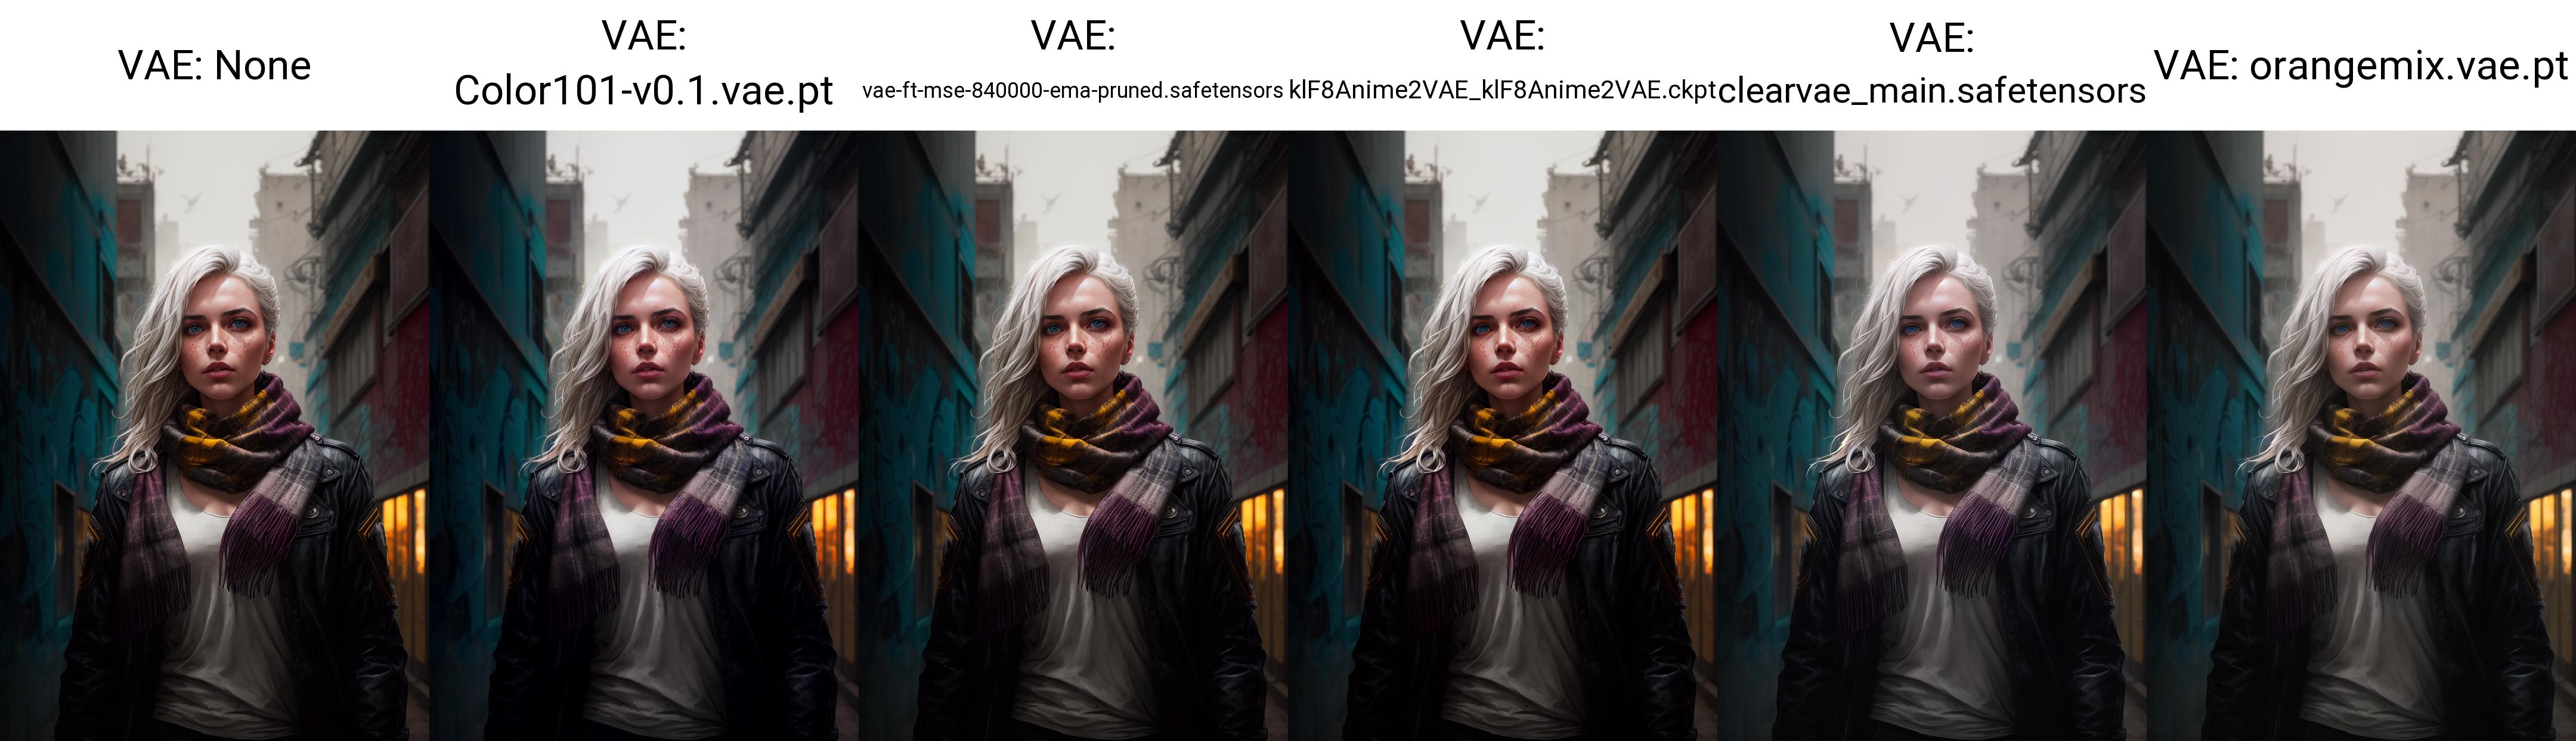 Color101 VAE image by Rexts